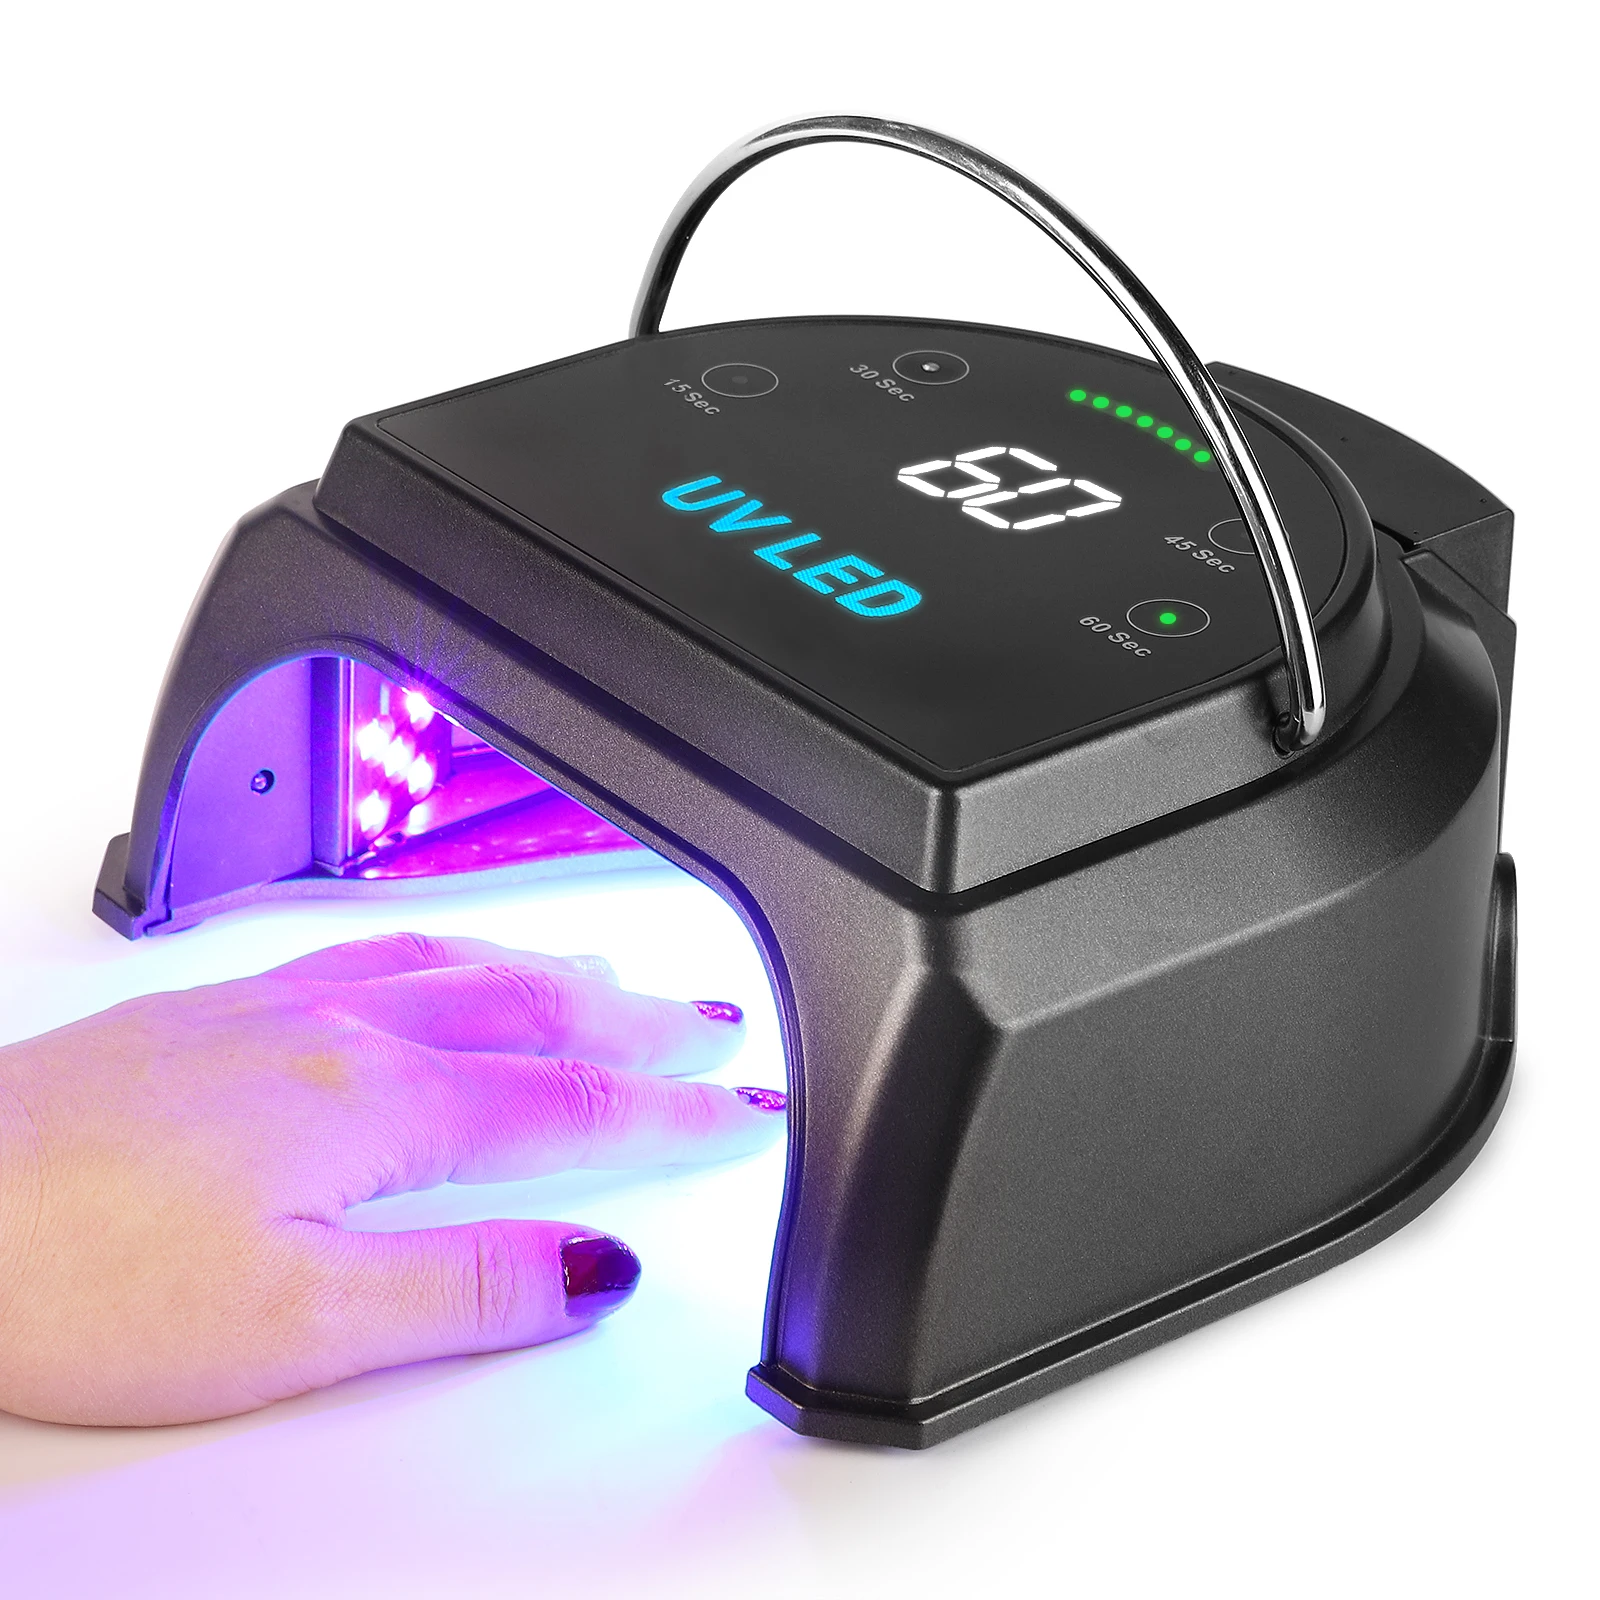 

2021 ODM/OEM Nail Salon Professional Cordless Rechargeable Portable Electric Gel Nail Curing Lamp Dryer Sun 60W UV LED Nail Lamp, White+black